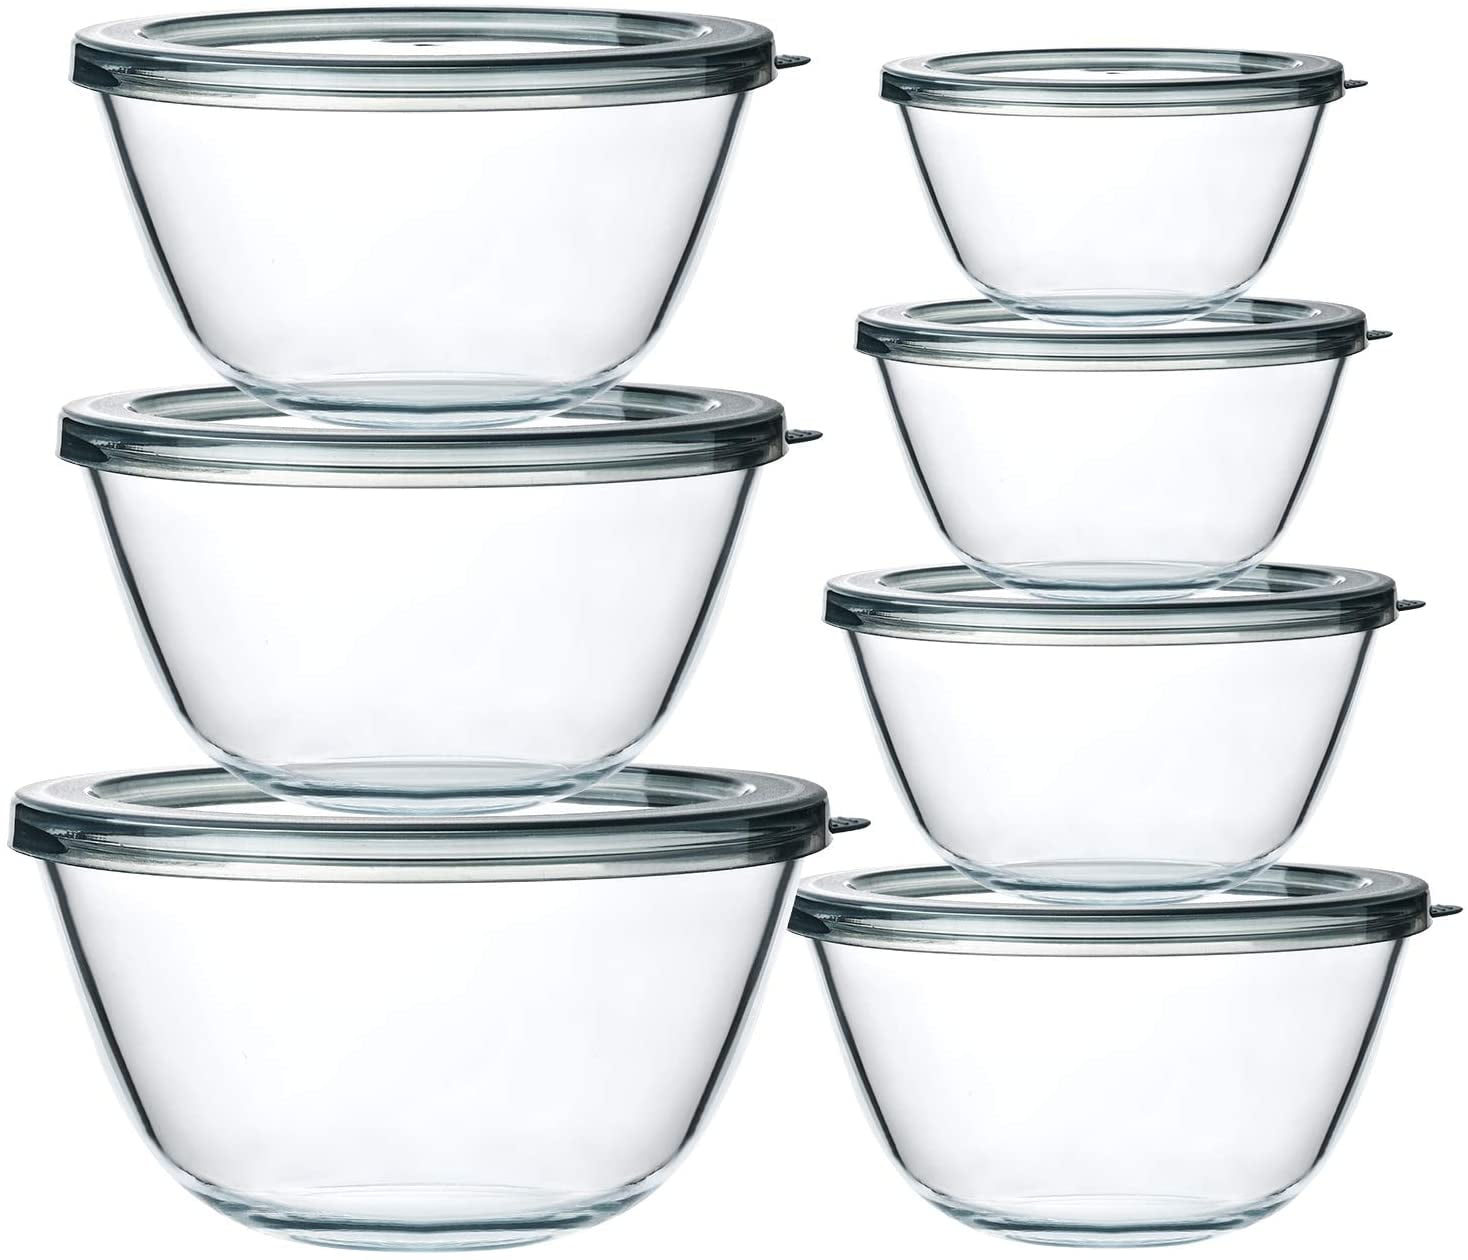 Swell Prep Food Glass Bowls Set of 4 12oz Make Meal Easy and Convenient  Leak Resistant Pop Top Lids Microwavable and Dishwasher Safe clear 14212  B20 69900｜TikTok Search